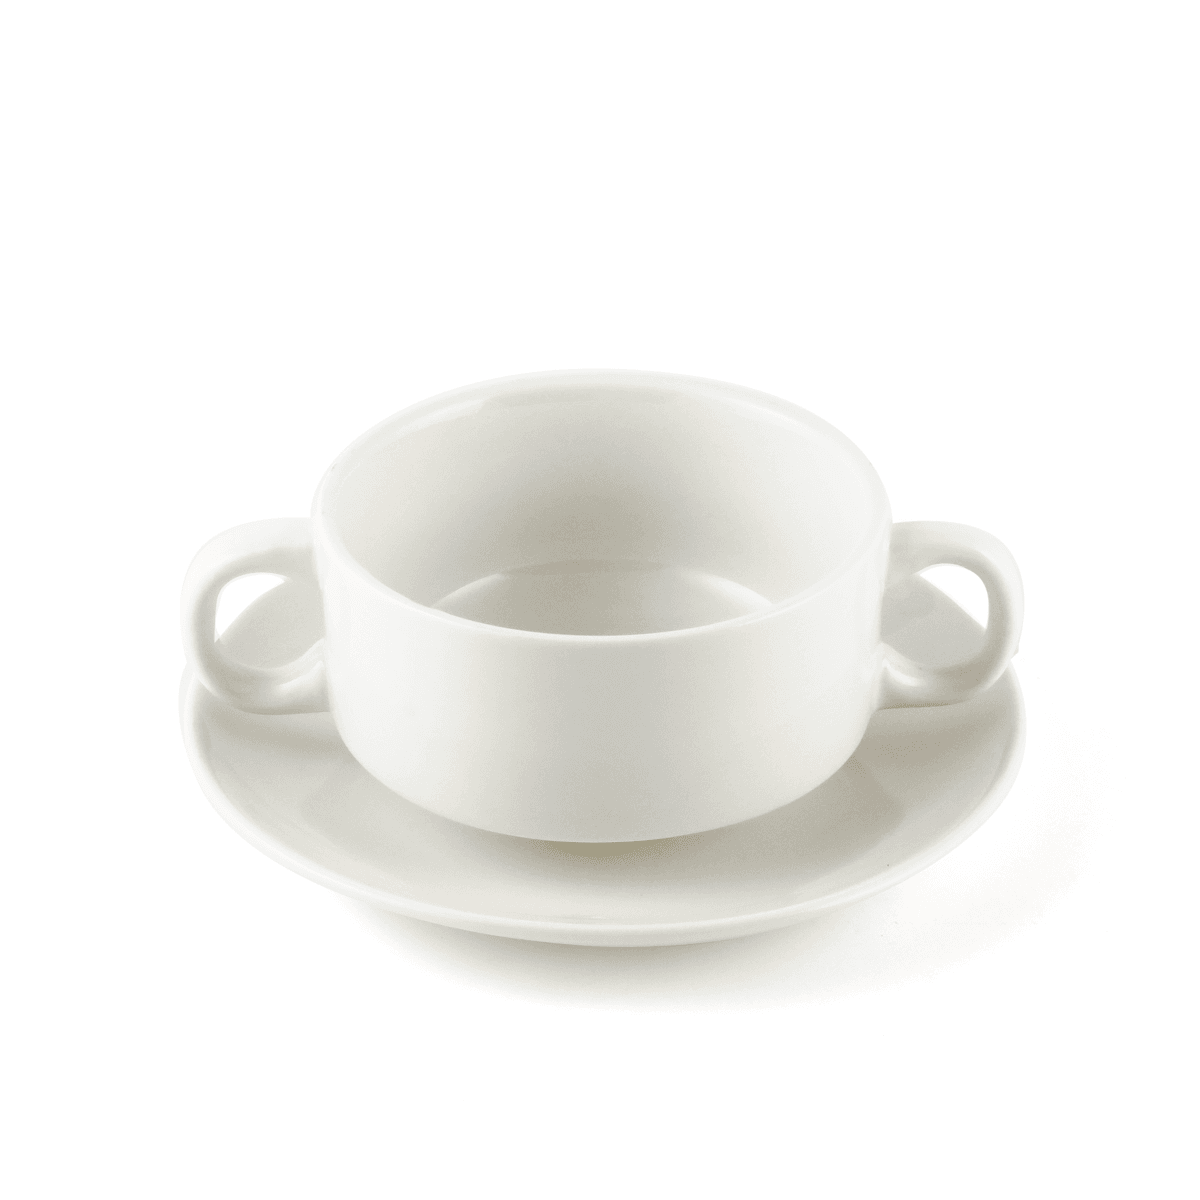 B2B Ivory Porcelain Soup Cup with Handles & Saucer 220 ml